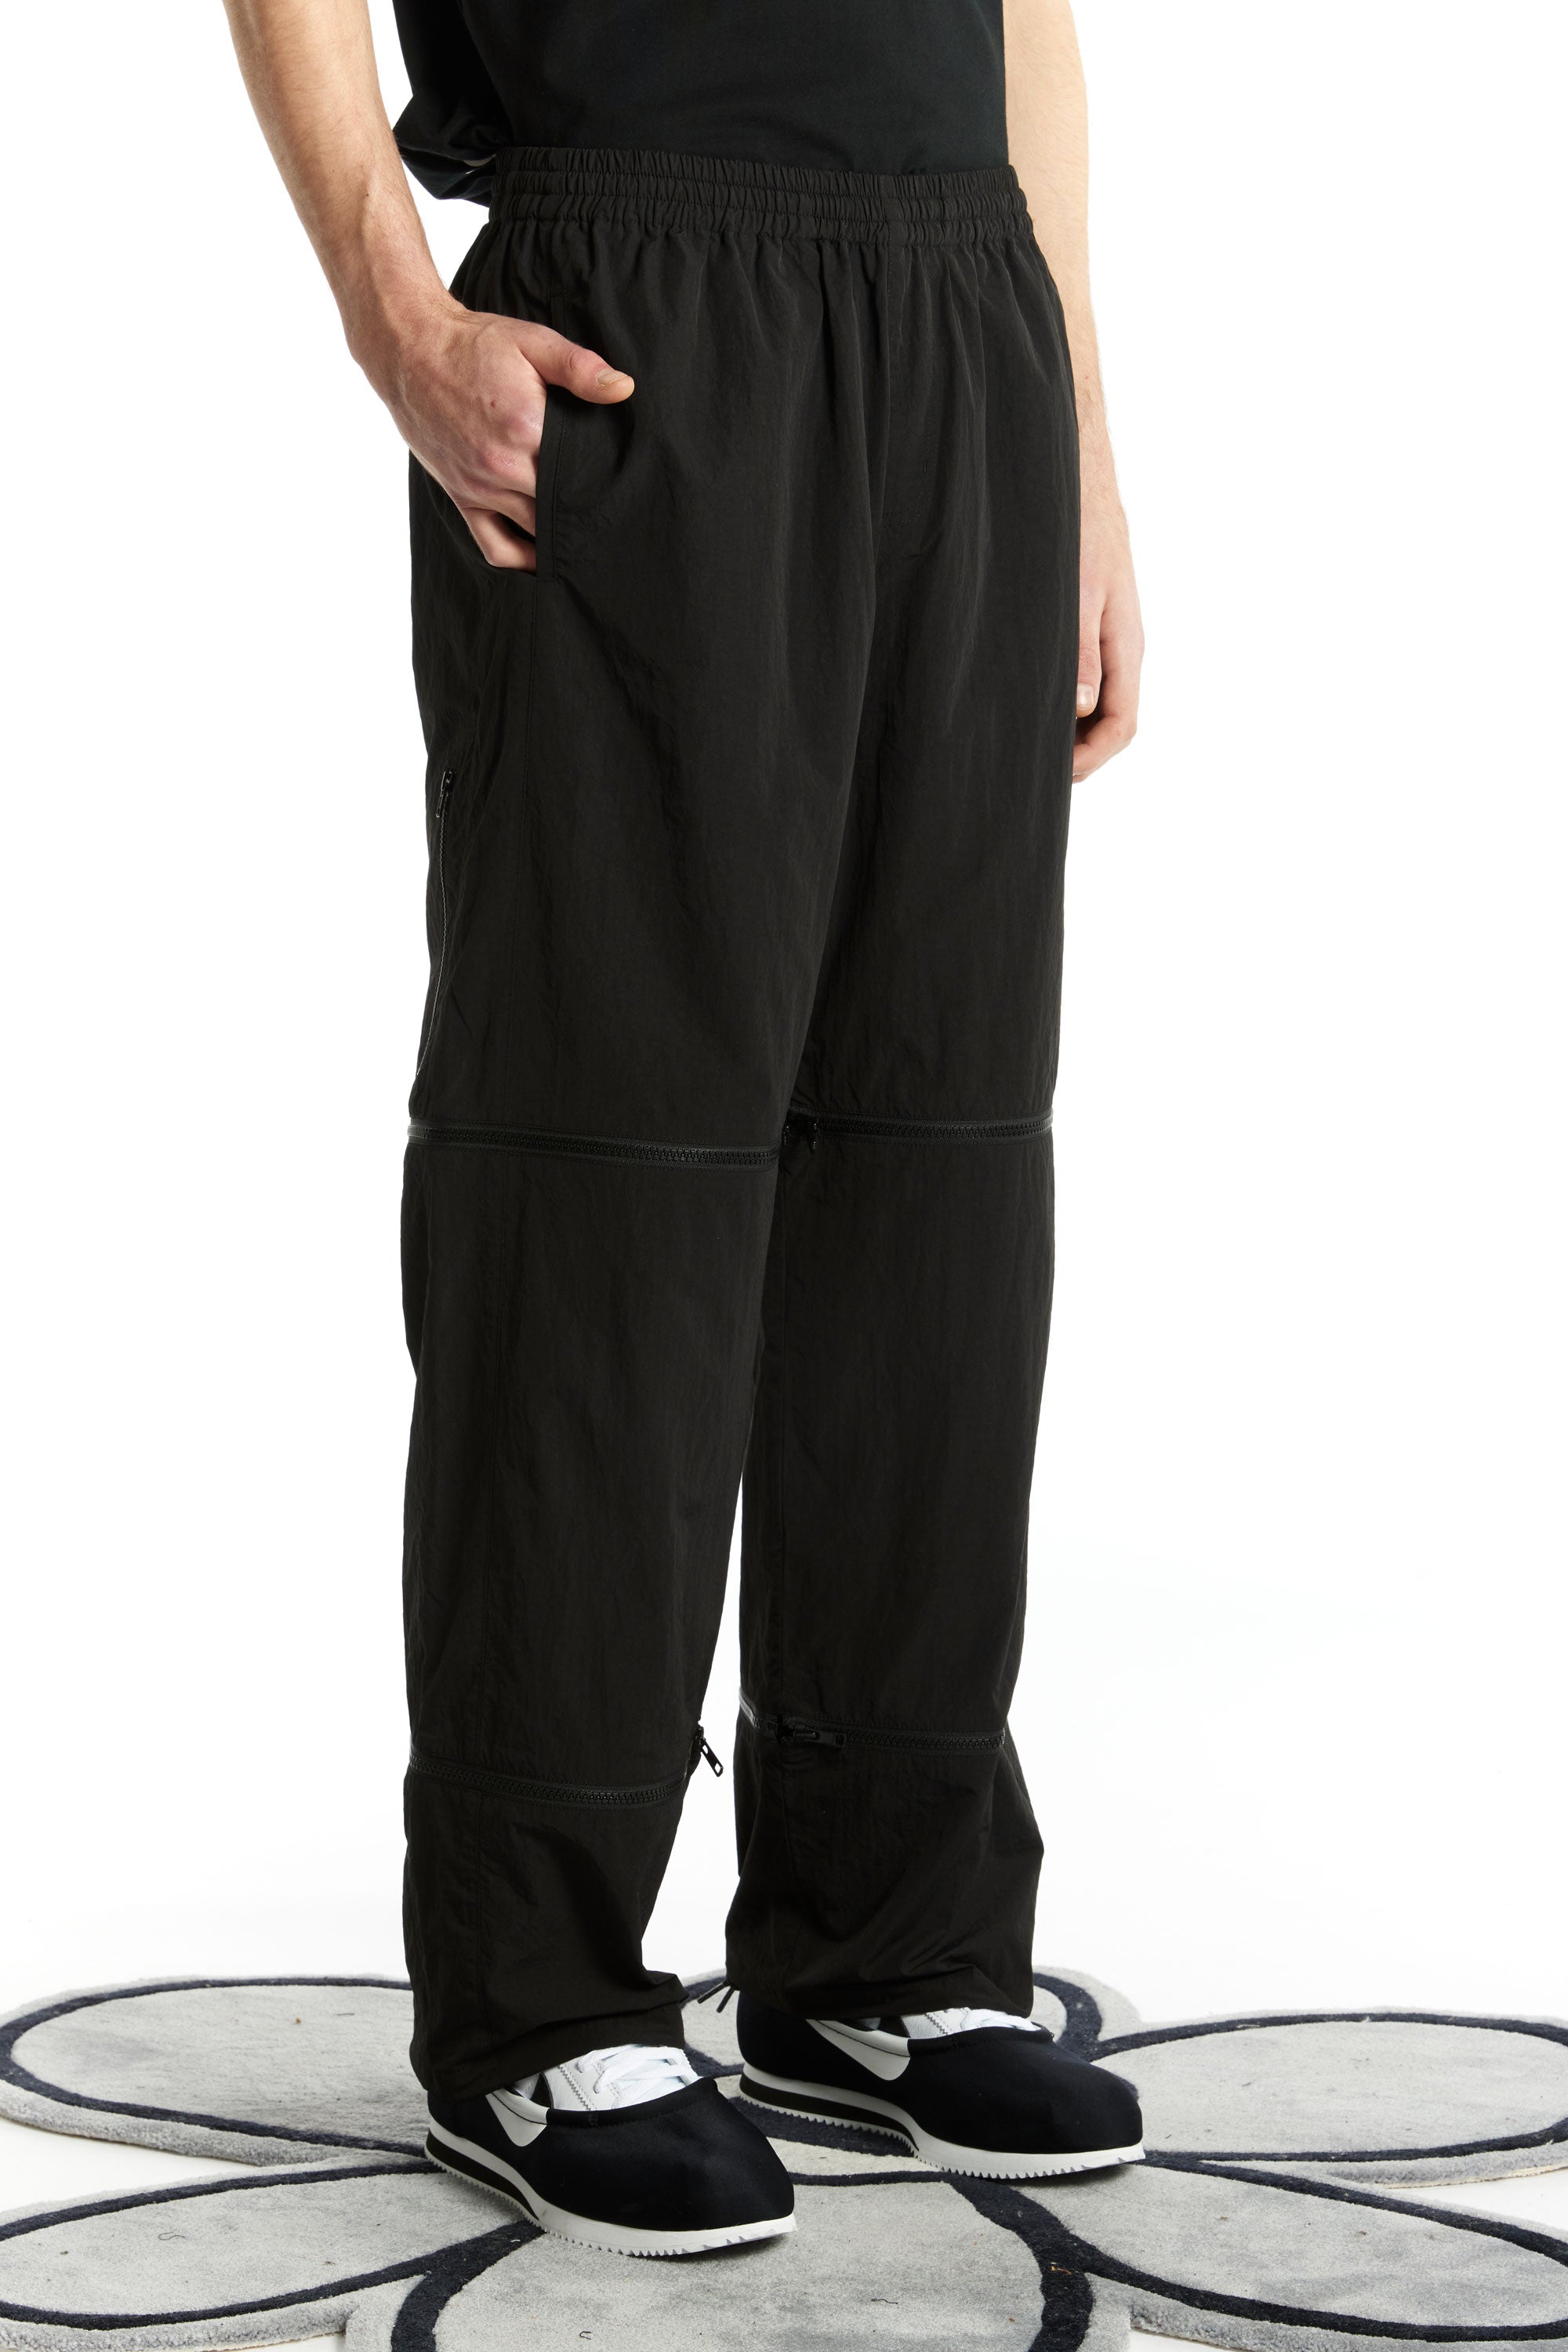 The P.WORLD LIFTED ZIP TRACK PANT  available online with global shipping, and in PAM Stores Melbourne and Sydney.